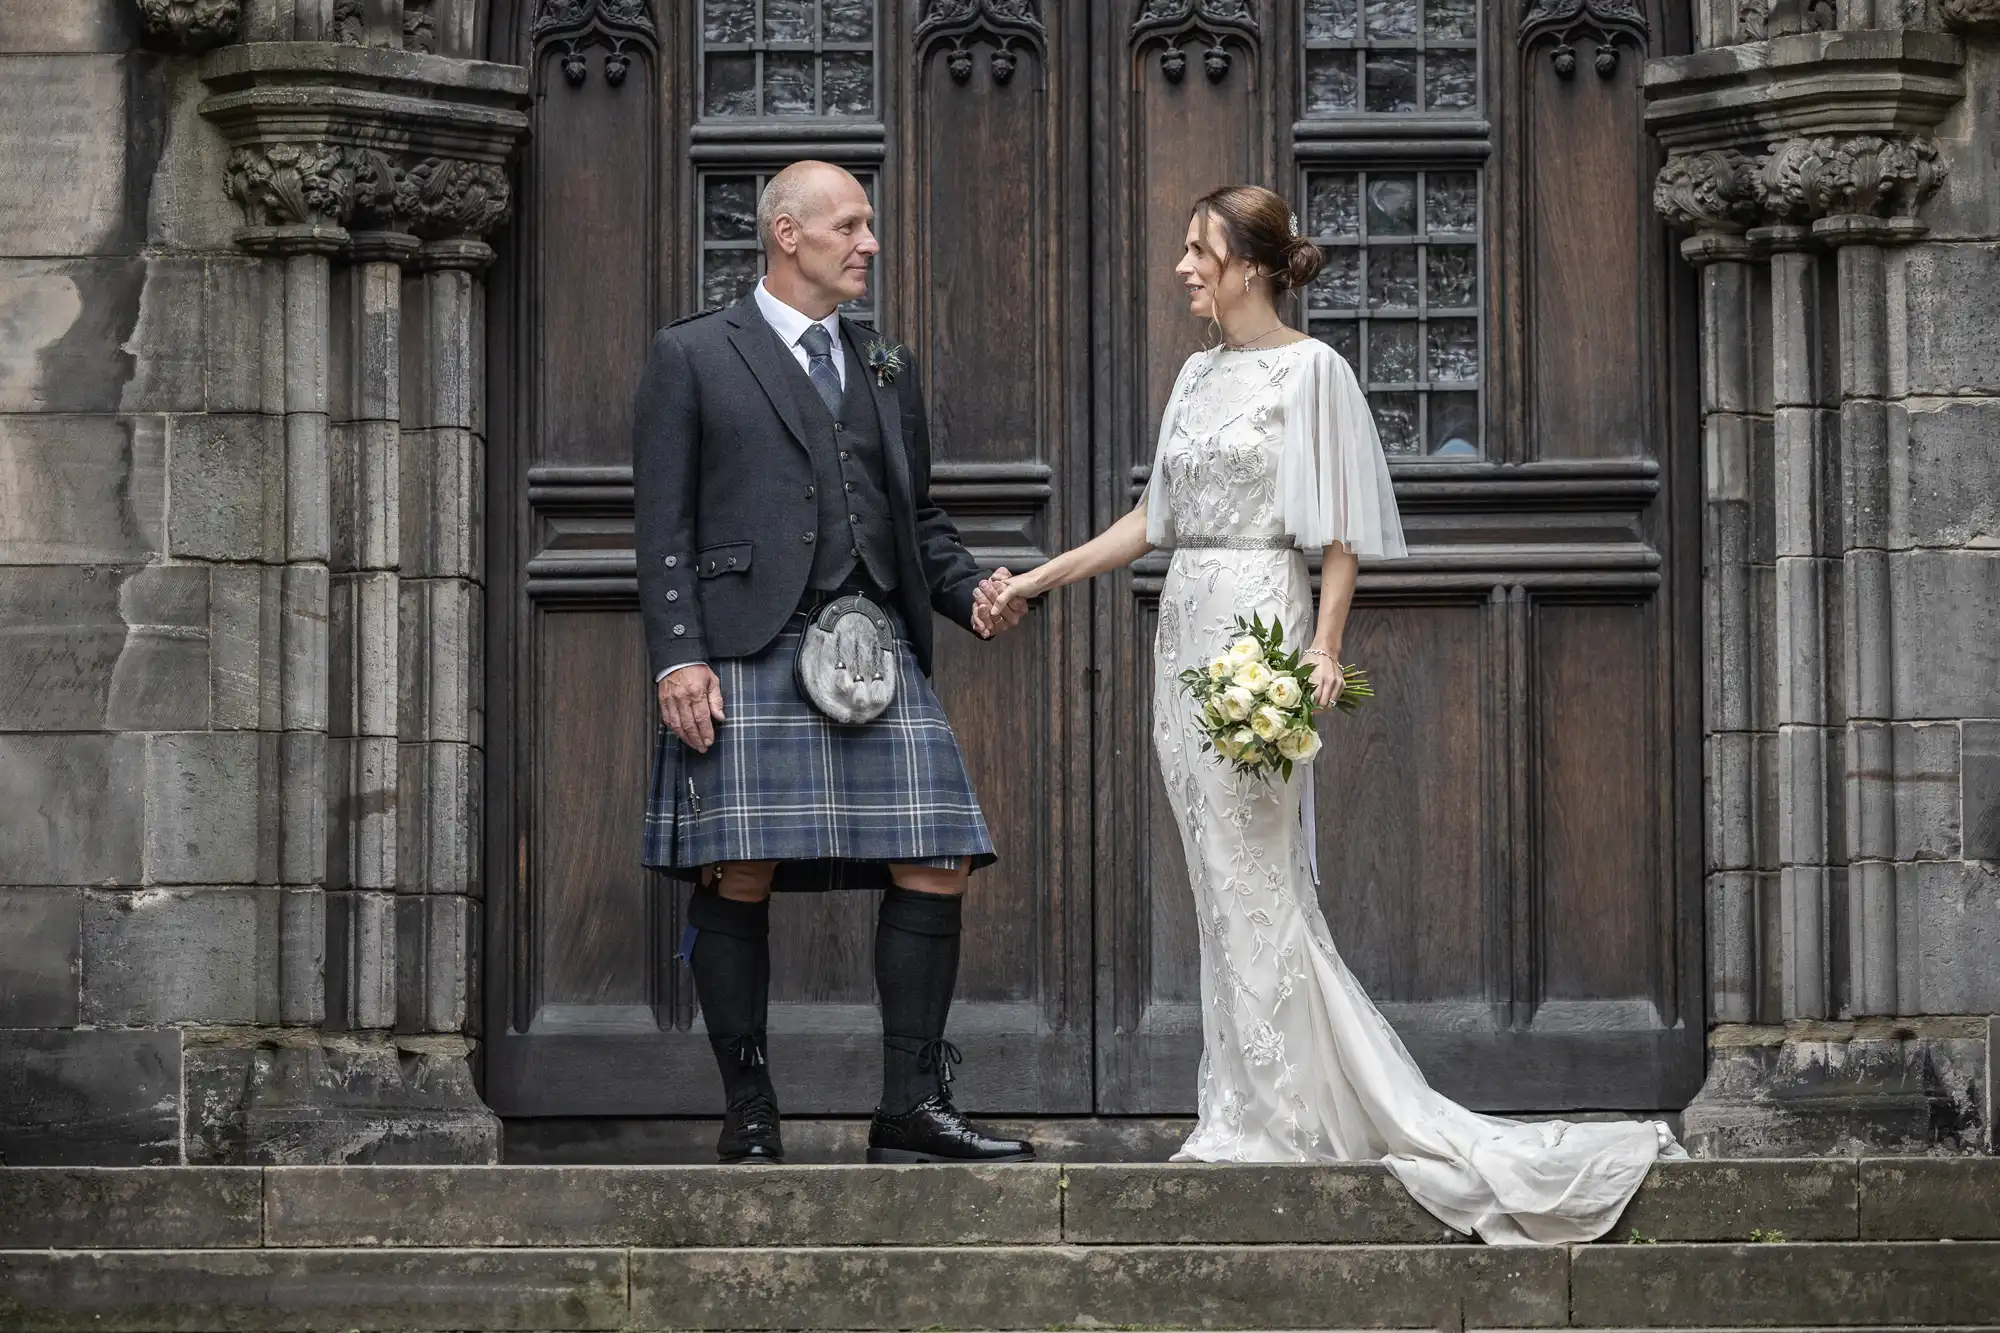 A man in traditional Scottish attire and a woman in a white dress hold hands on stone steps in front of a large wooden door with intricate carvings and tall windows.